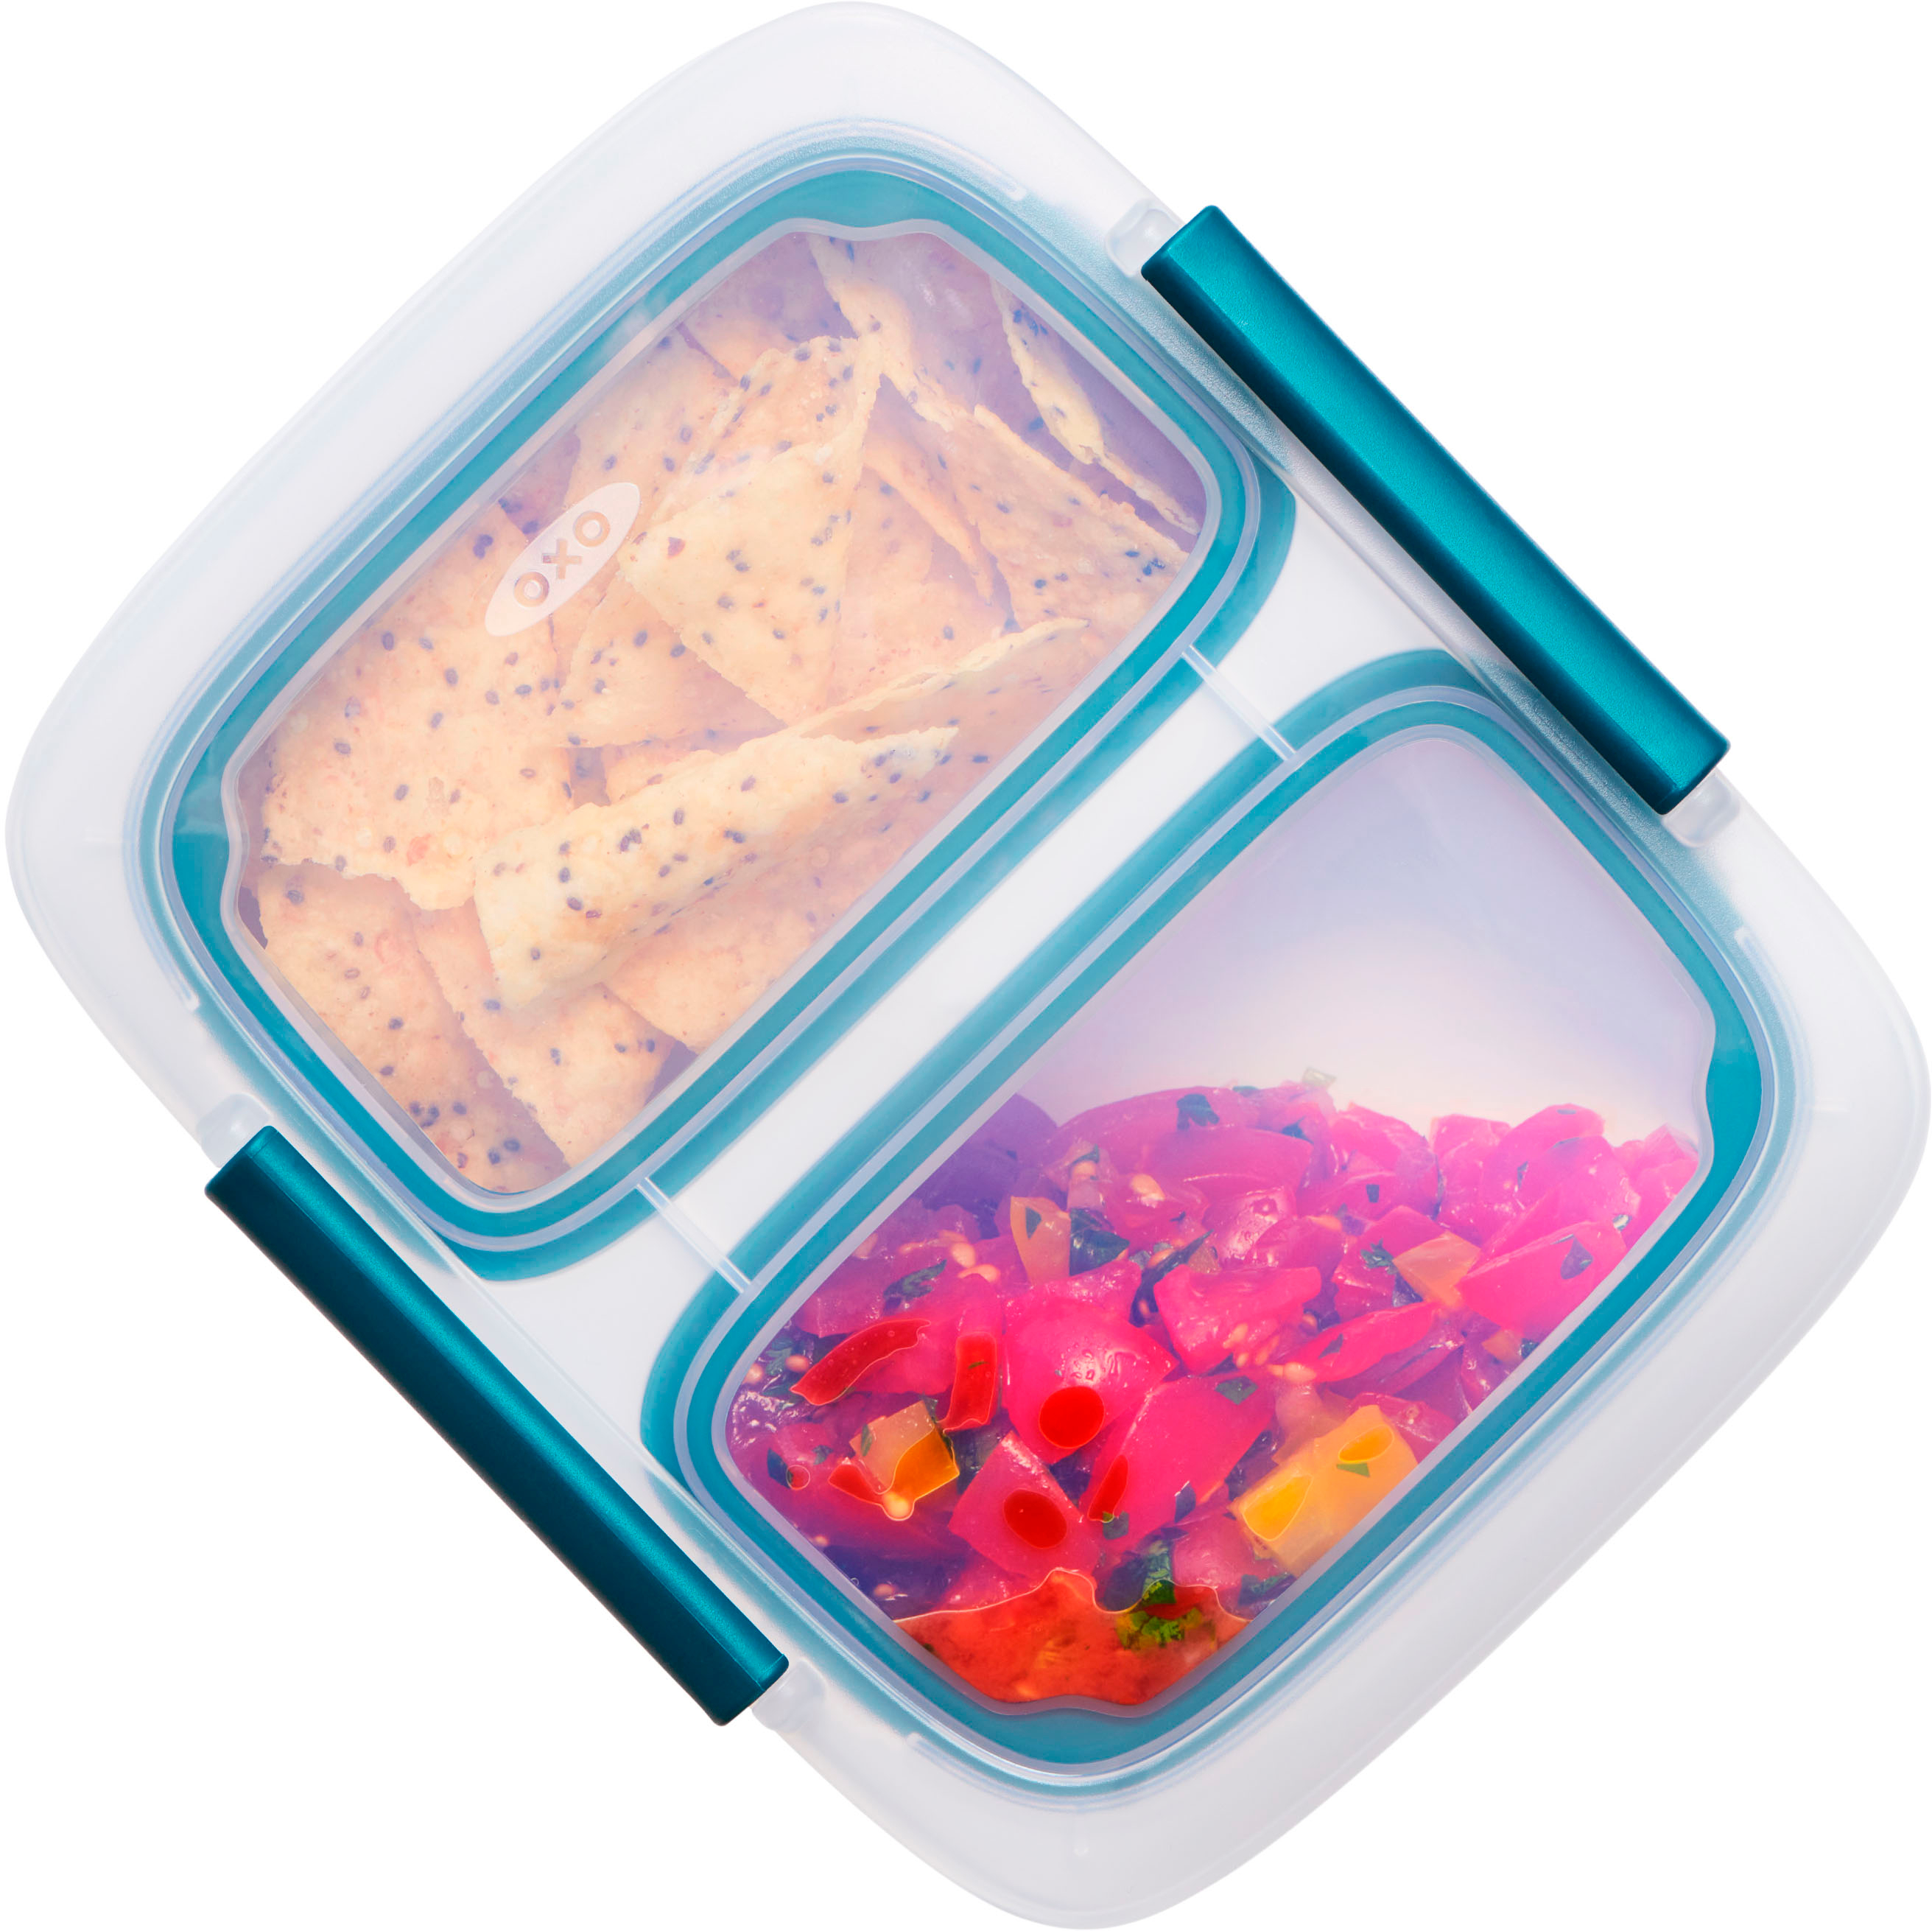 OXO Good Grips Prep & Go 10 Piece Set | Leakproof Food Storage | Ideal for Leftovers, Meal Prep and Work Lunches | BPA Free | Microwave Safe 